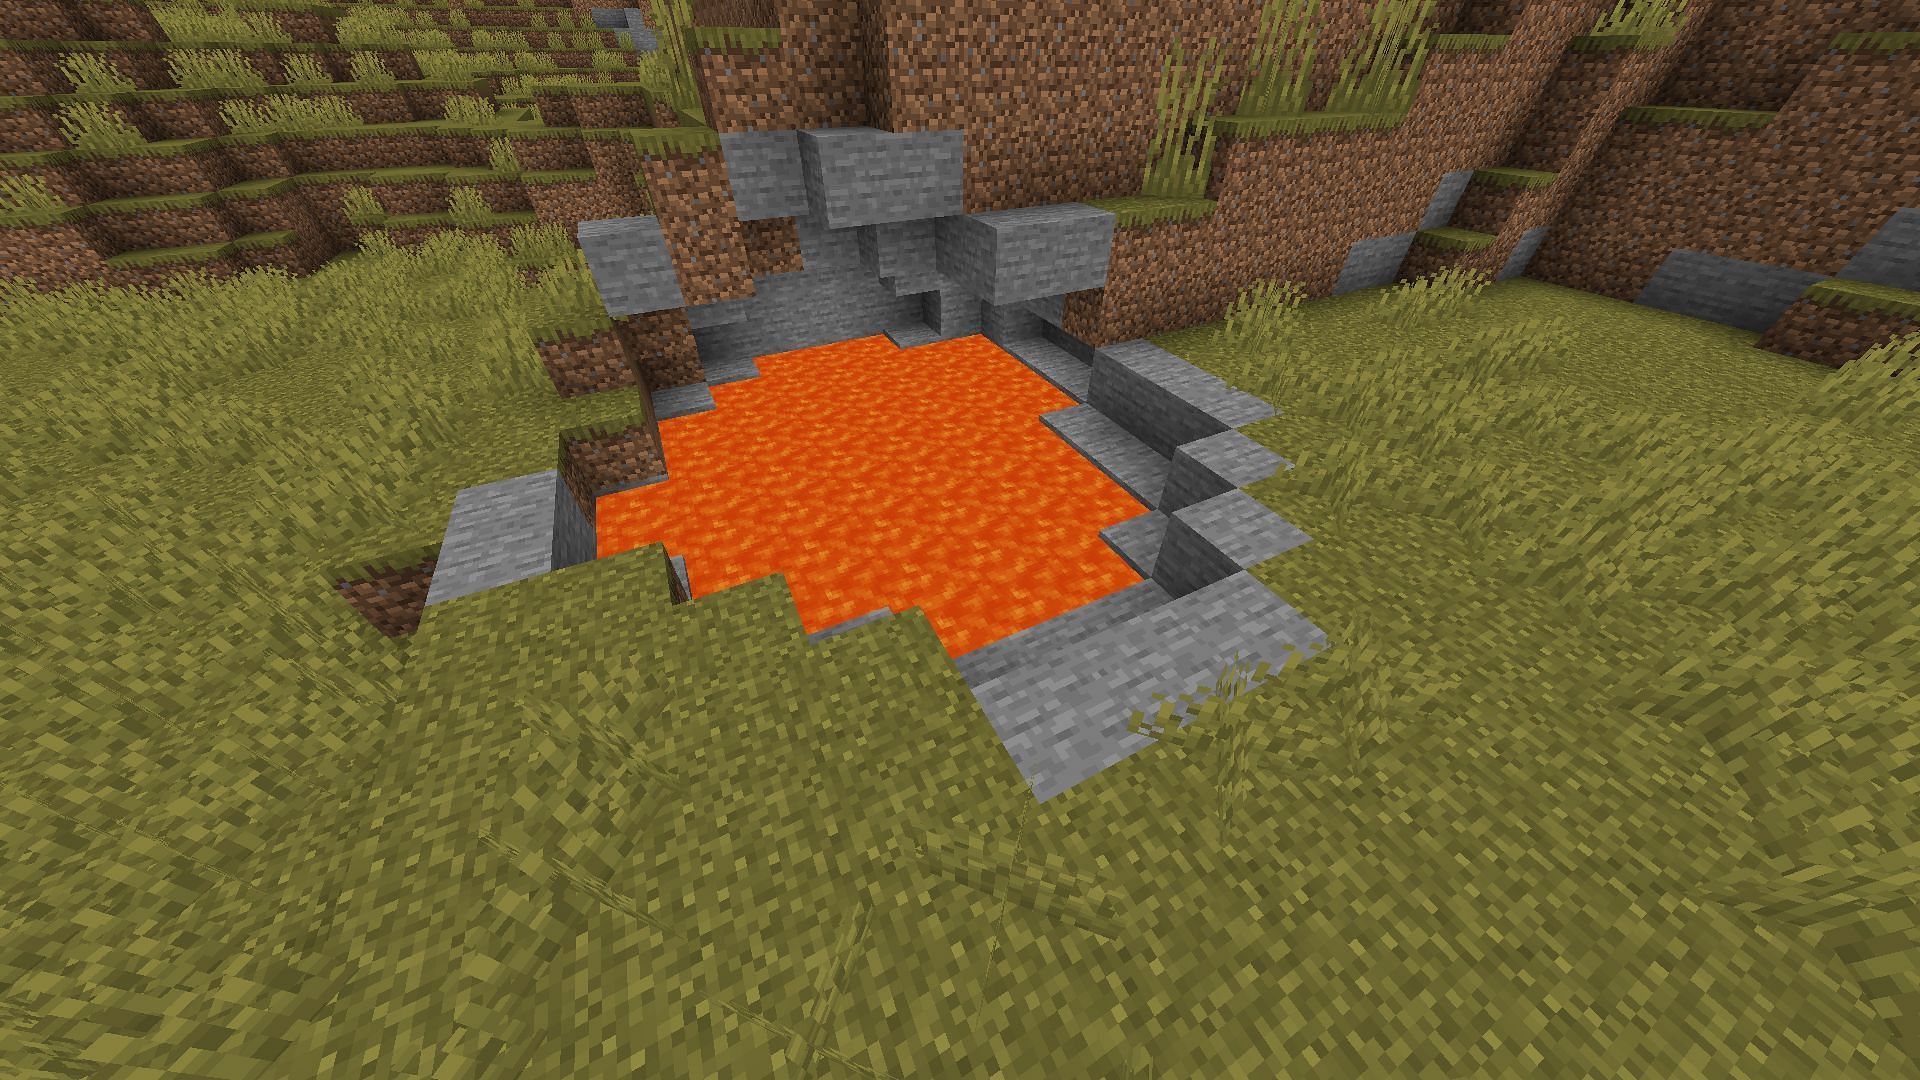 Lava lake is a small pool of lava either generated underground or on the surface in Overworld (Image via Mojang)